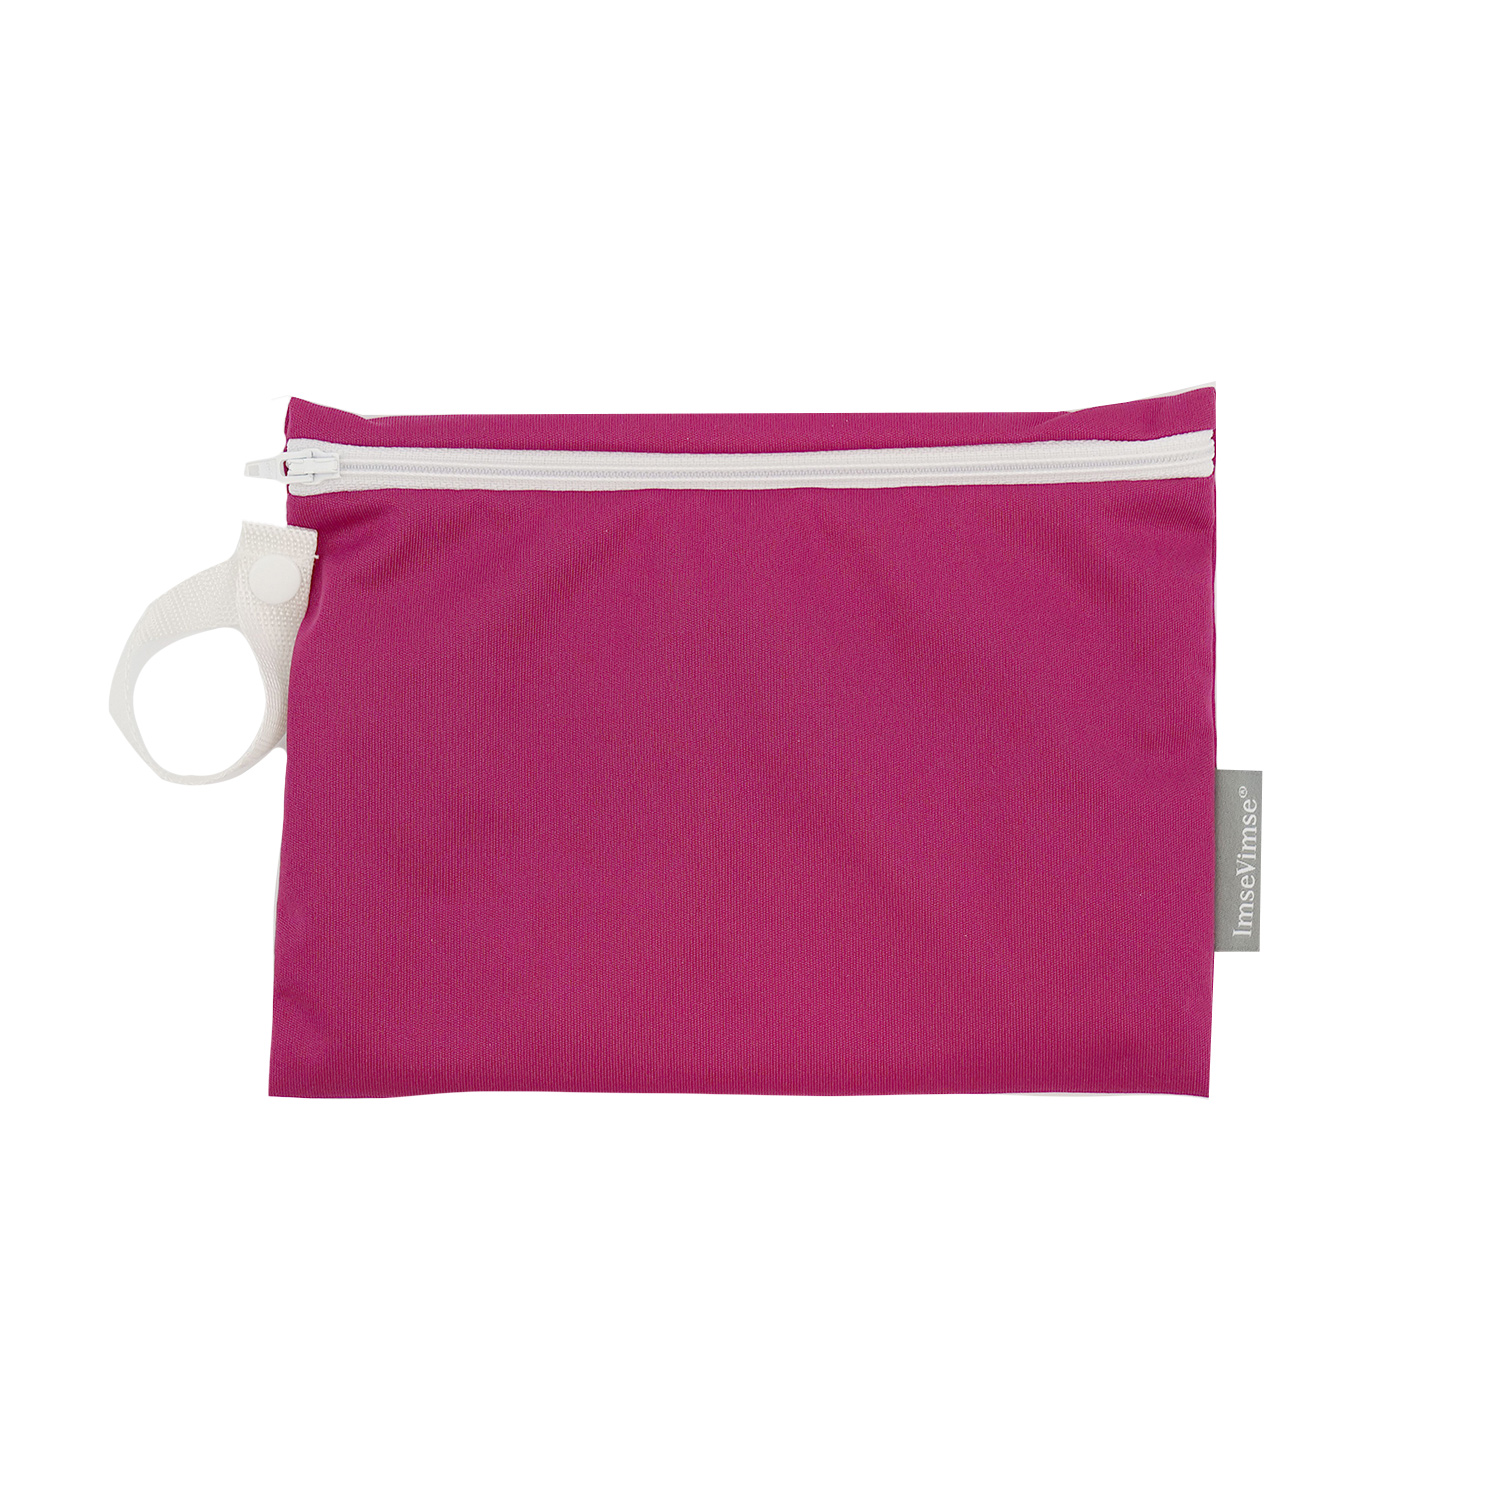 Imse Wetbag (XS)